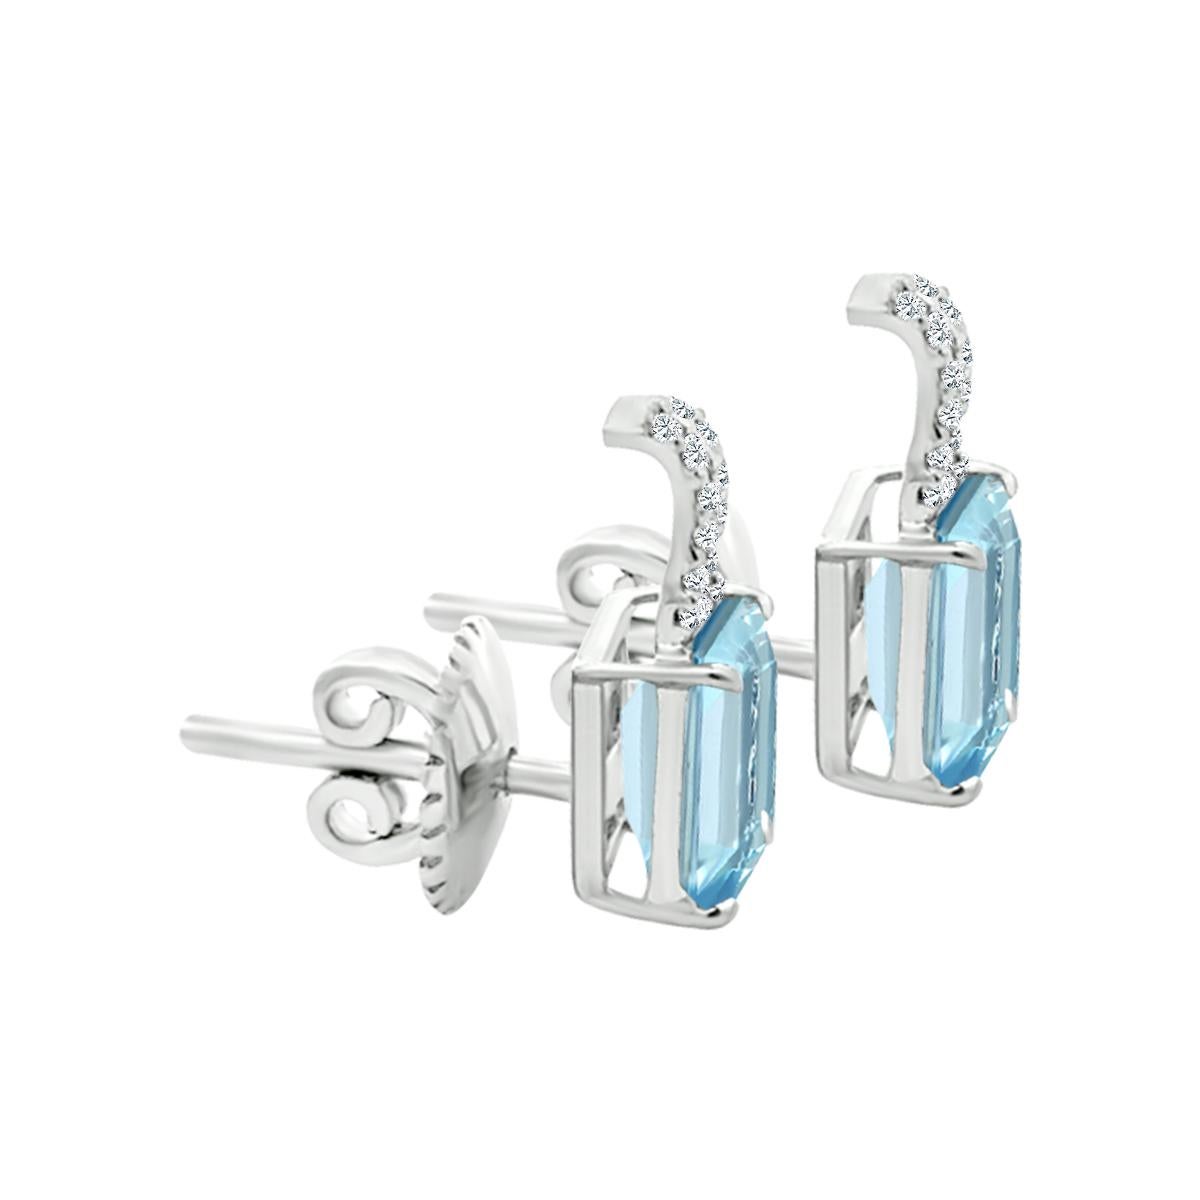 Our Striking 14K White Gold Aquamarine And Diamond Stud Earrings Have A Sensational Presence And Style!
The peaceful Shimmer Of These Stud Earring Will Bring A Touch Of Tranquility To Your Outfit, Features 7x5mm Aquamarine Gemstone With Diamonds